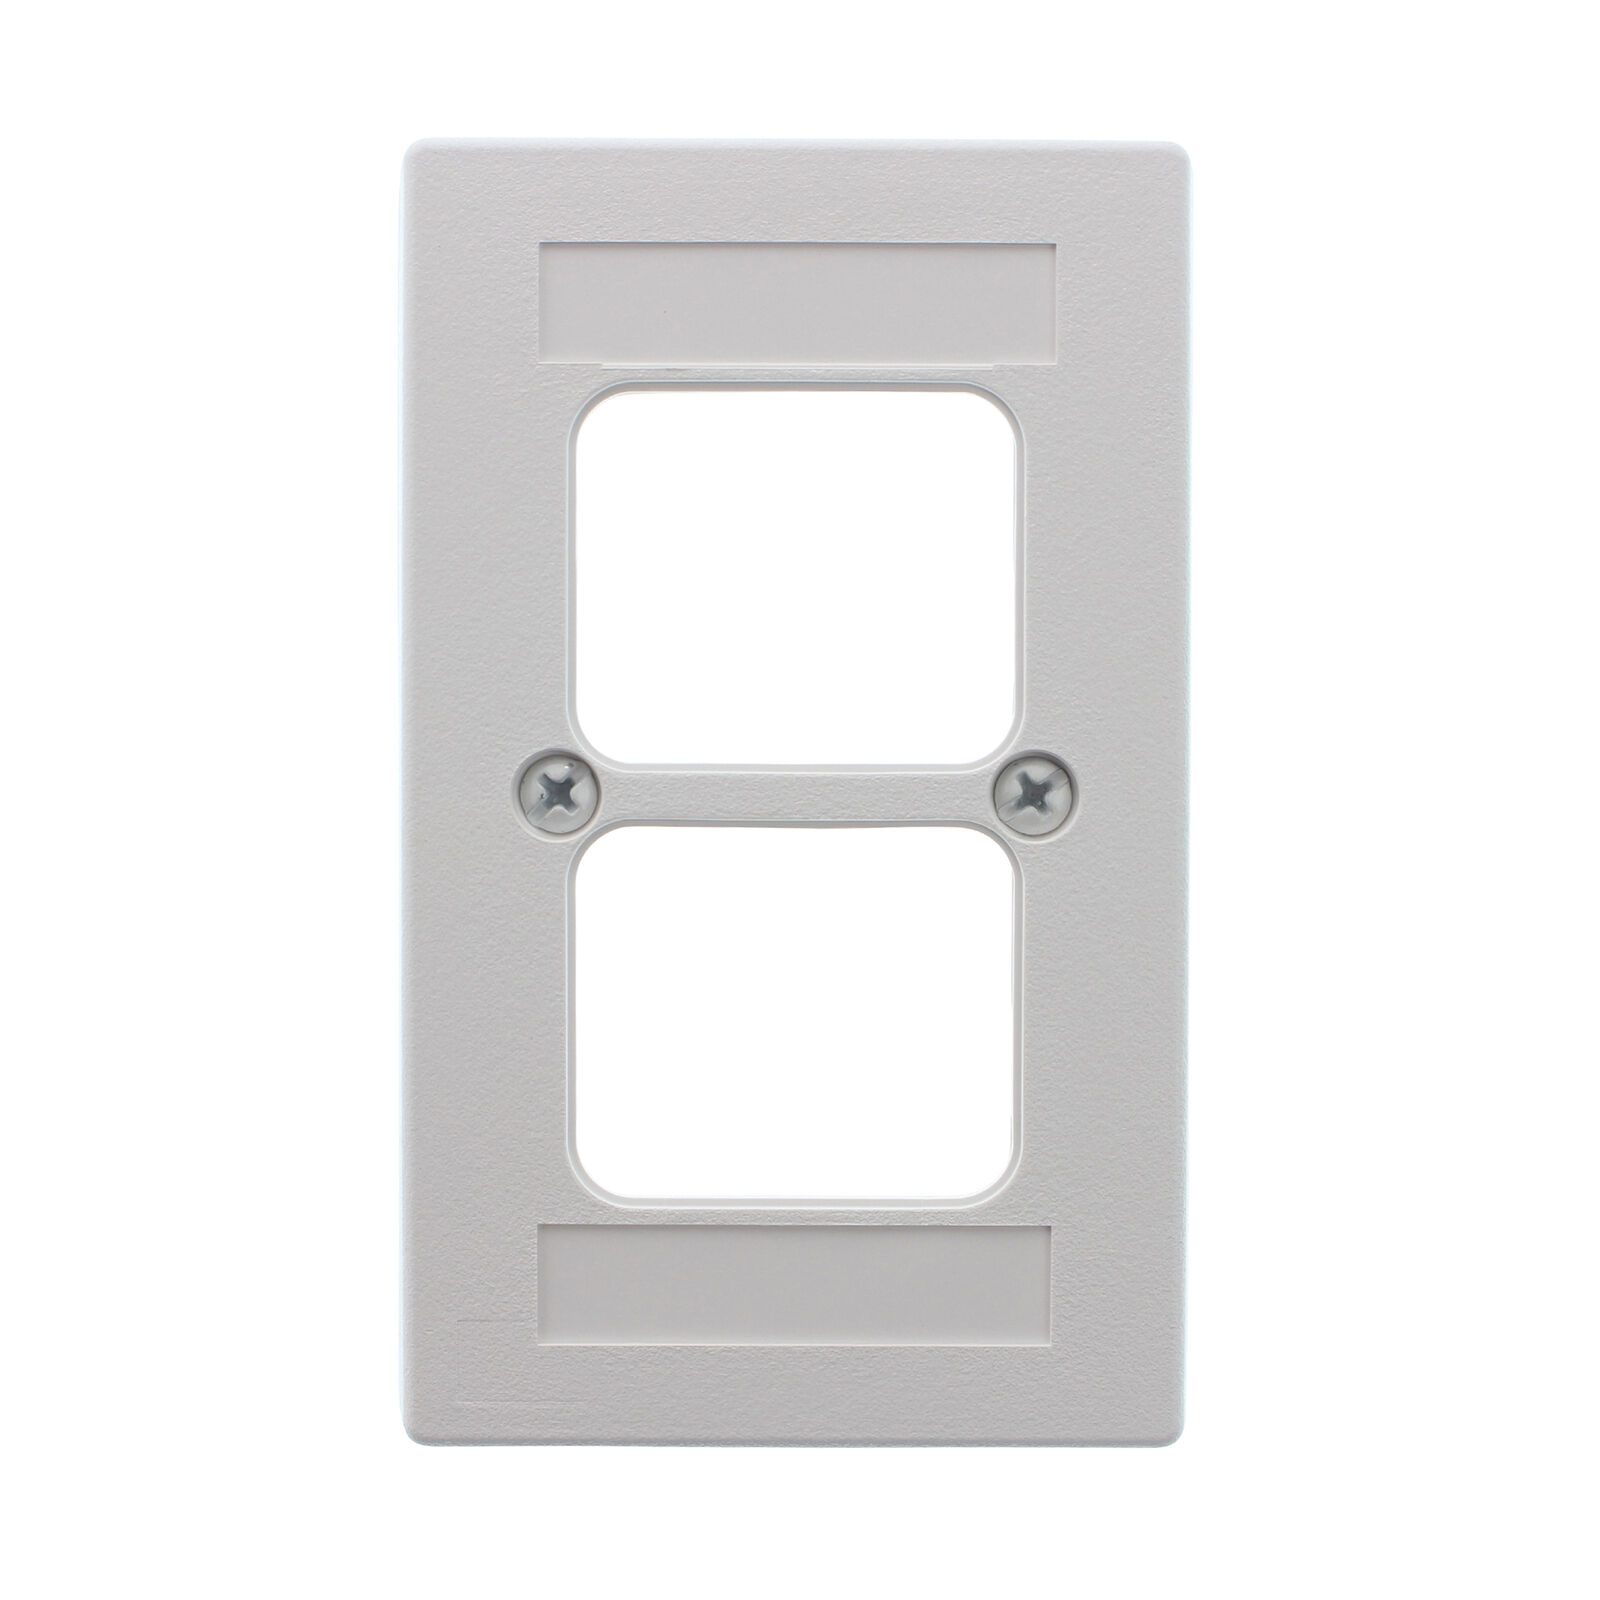 AMP TYCO TE 555650-5 WIRE DUCTING FACEPLATE KIT, 1-GANG, WHITE